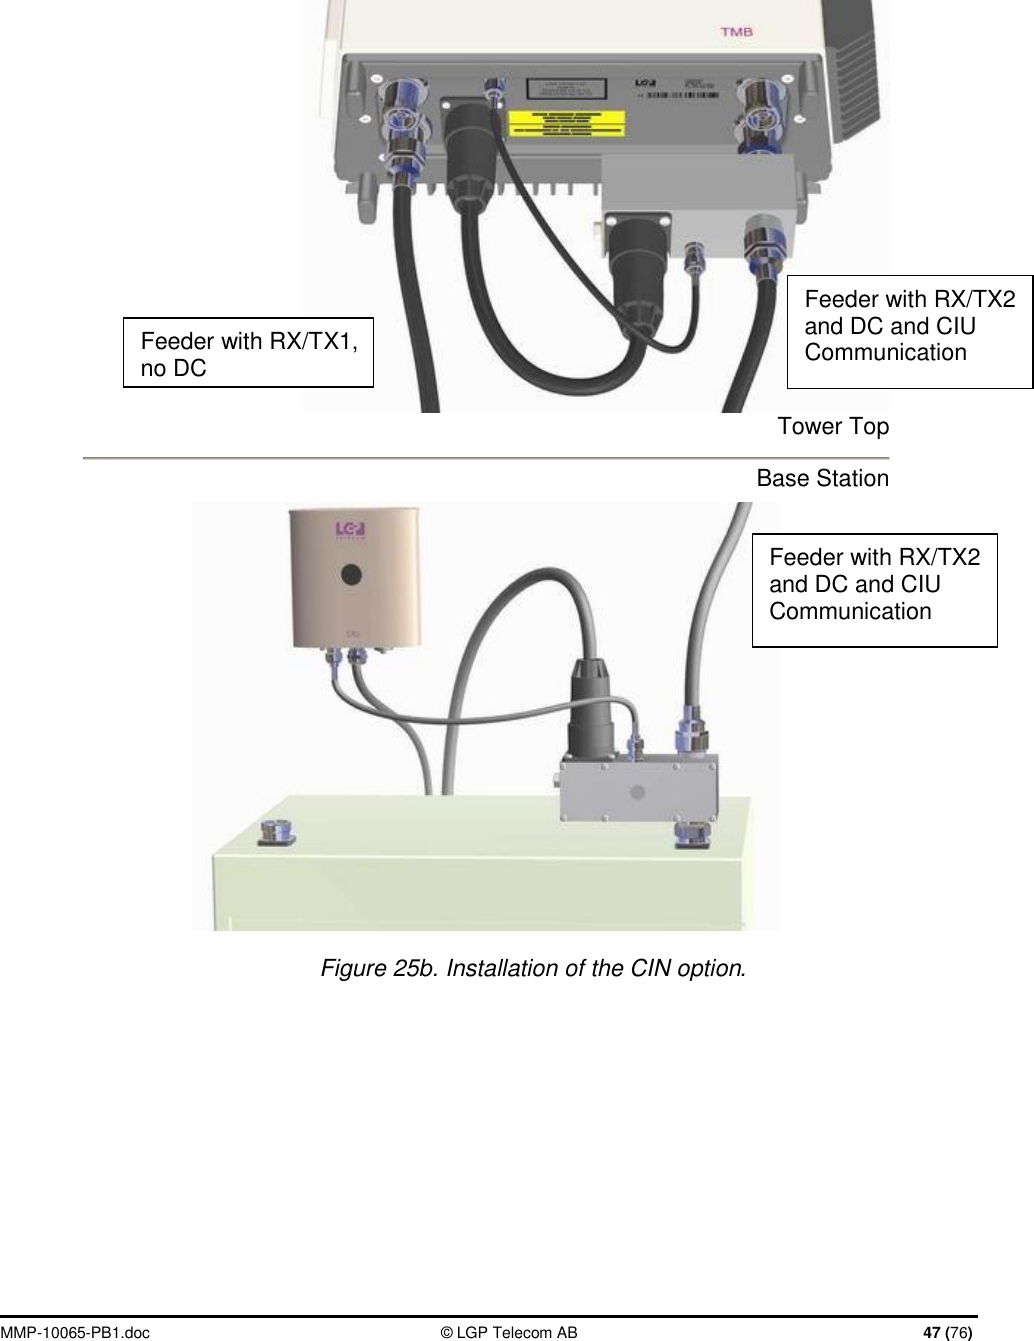  MMP-10065-PB1.doc  © LGP Telecom AB  47 (76)    Tower Top Base Station  Figure 25b. Installation of the CIN option. Feeder with RX/TX2 and DC and CIU Communication Feeder with RX/TX1, no DC Feeder with RX/TX2 and DC and CIU Communication 